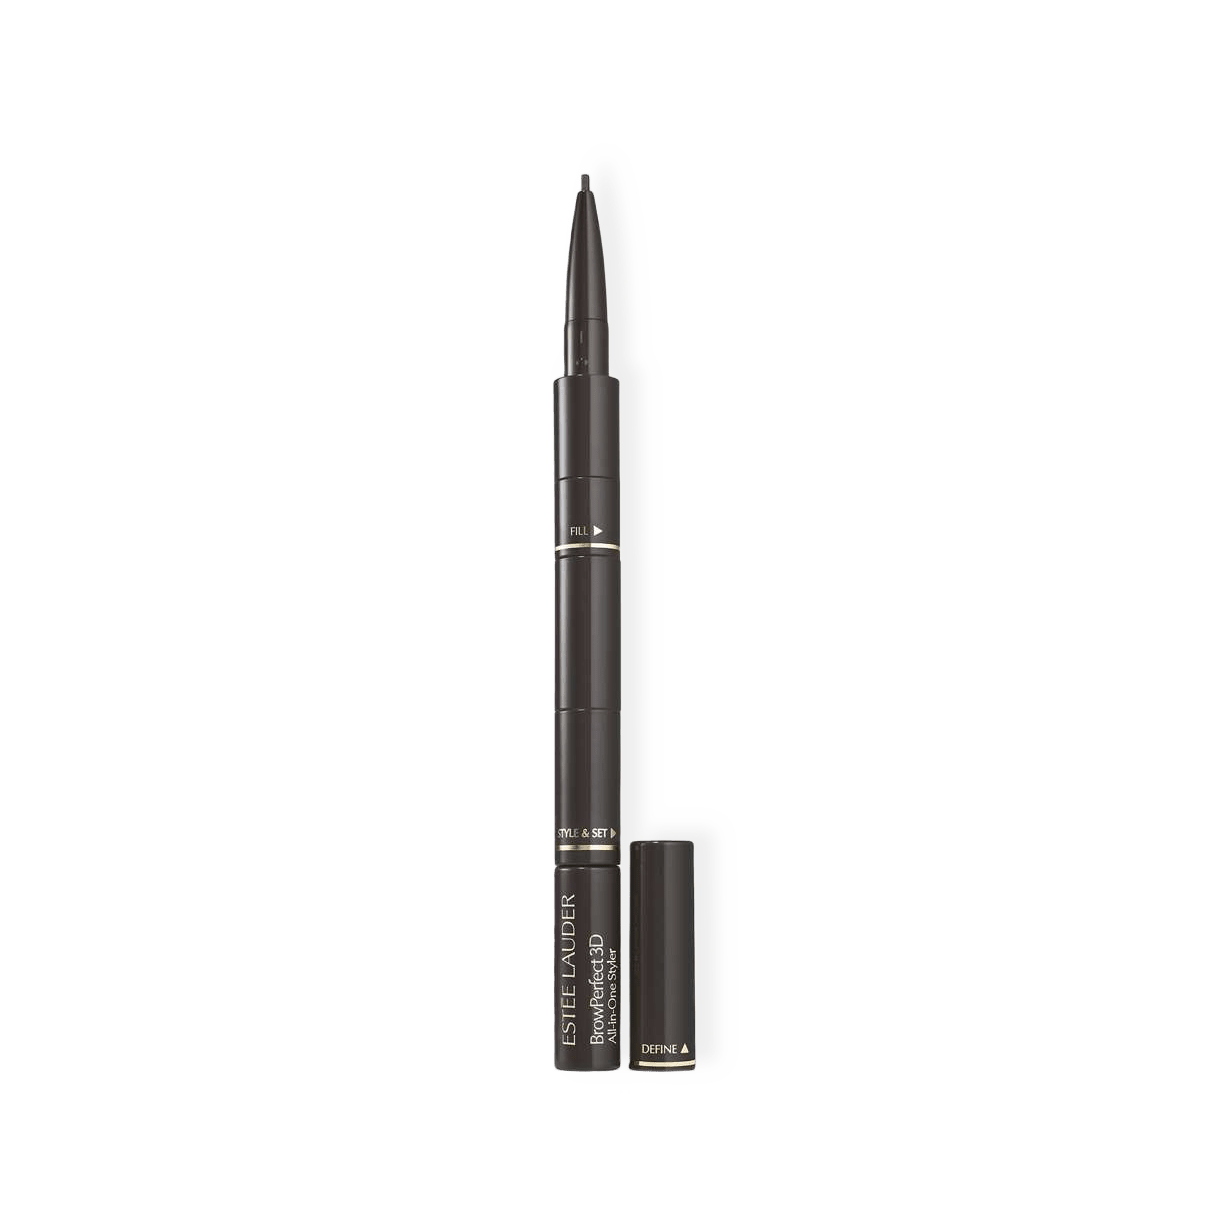 Browperfect 3-in-1 Brow Styler